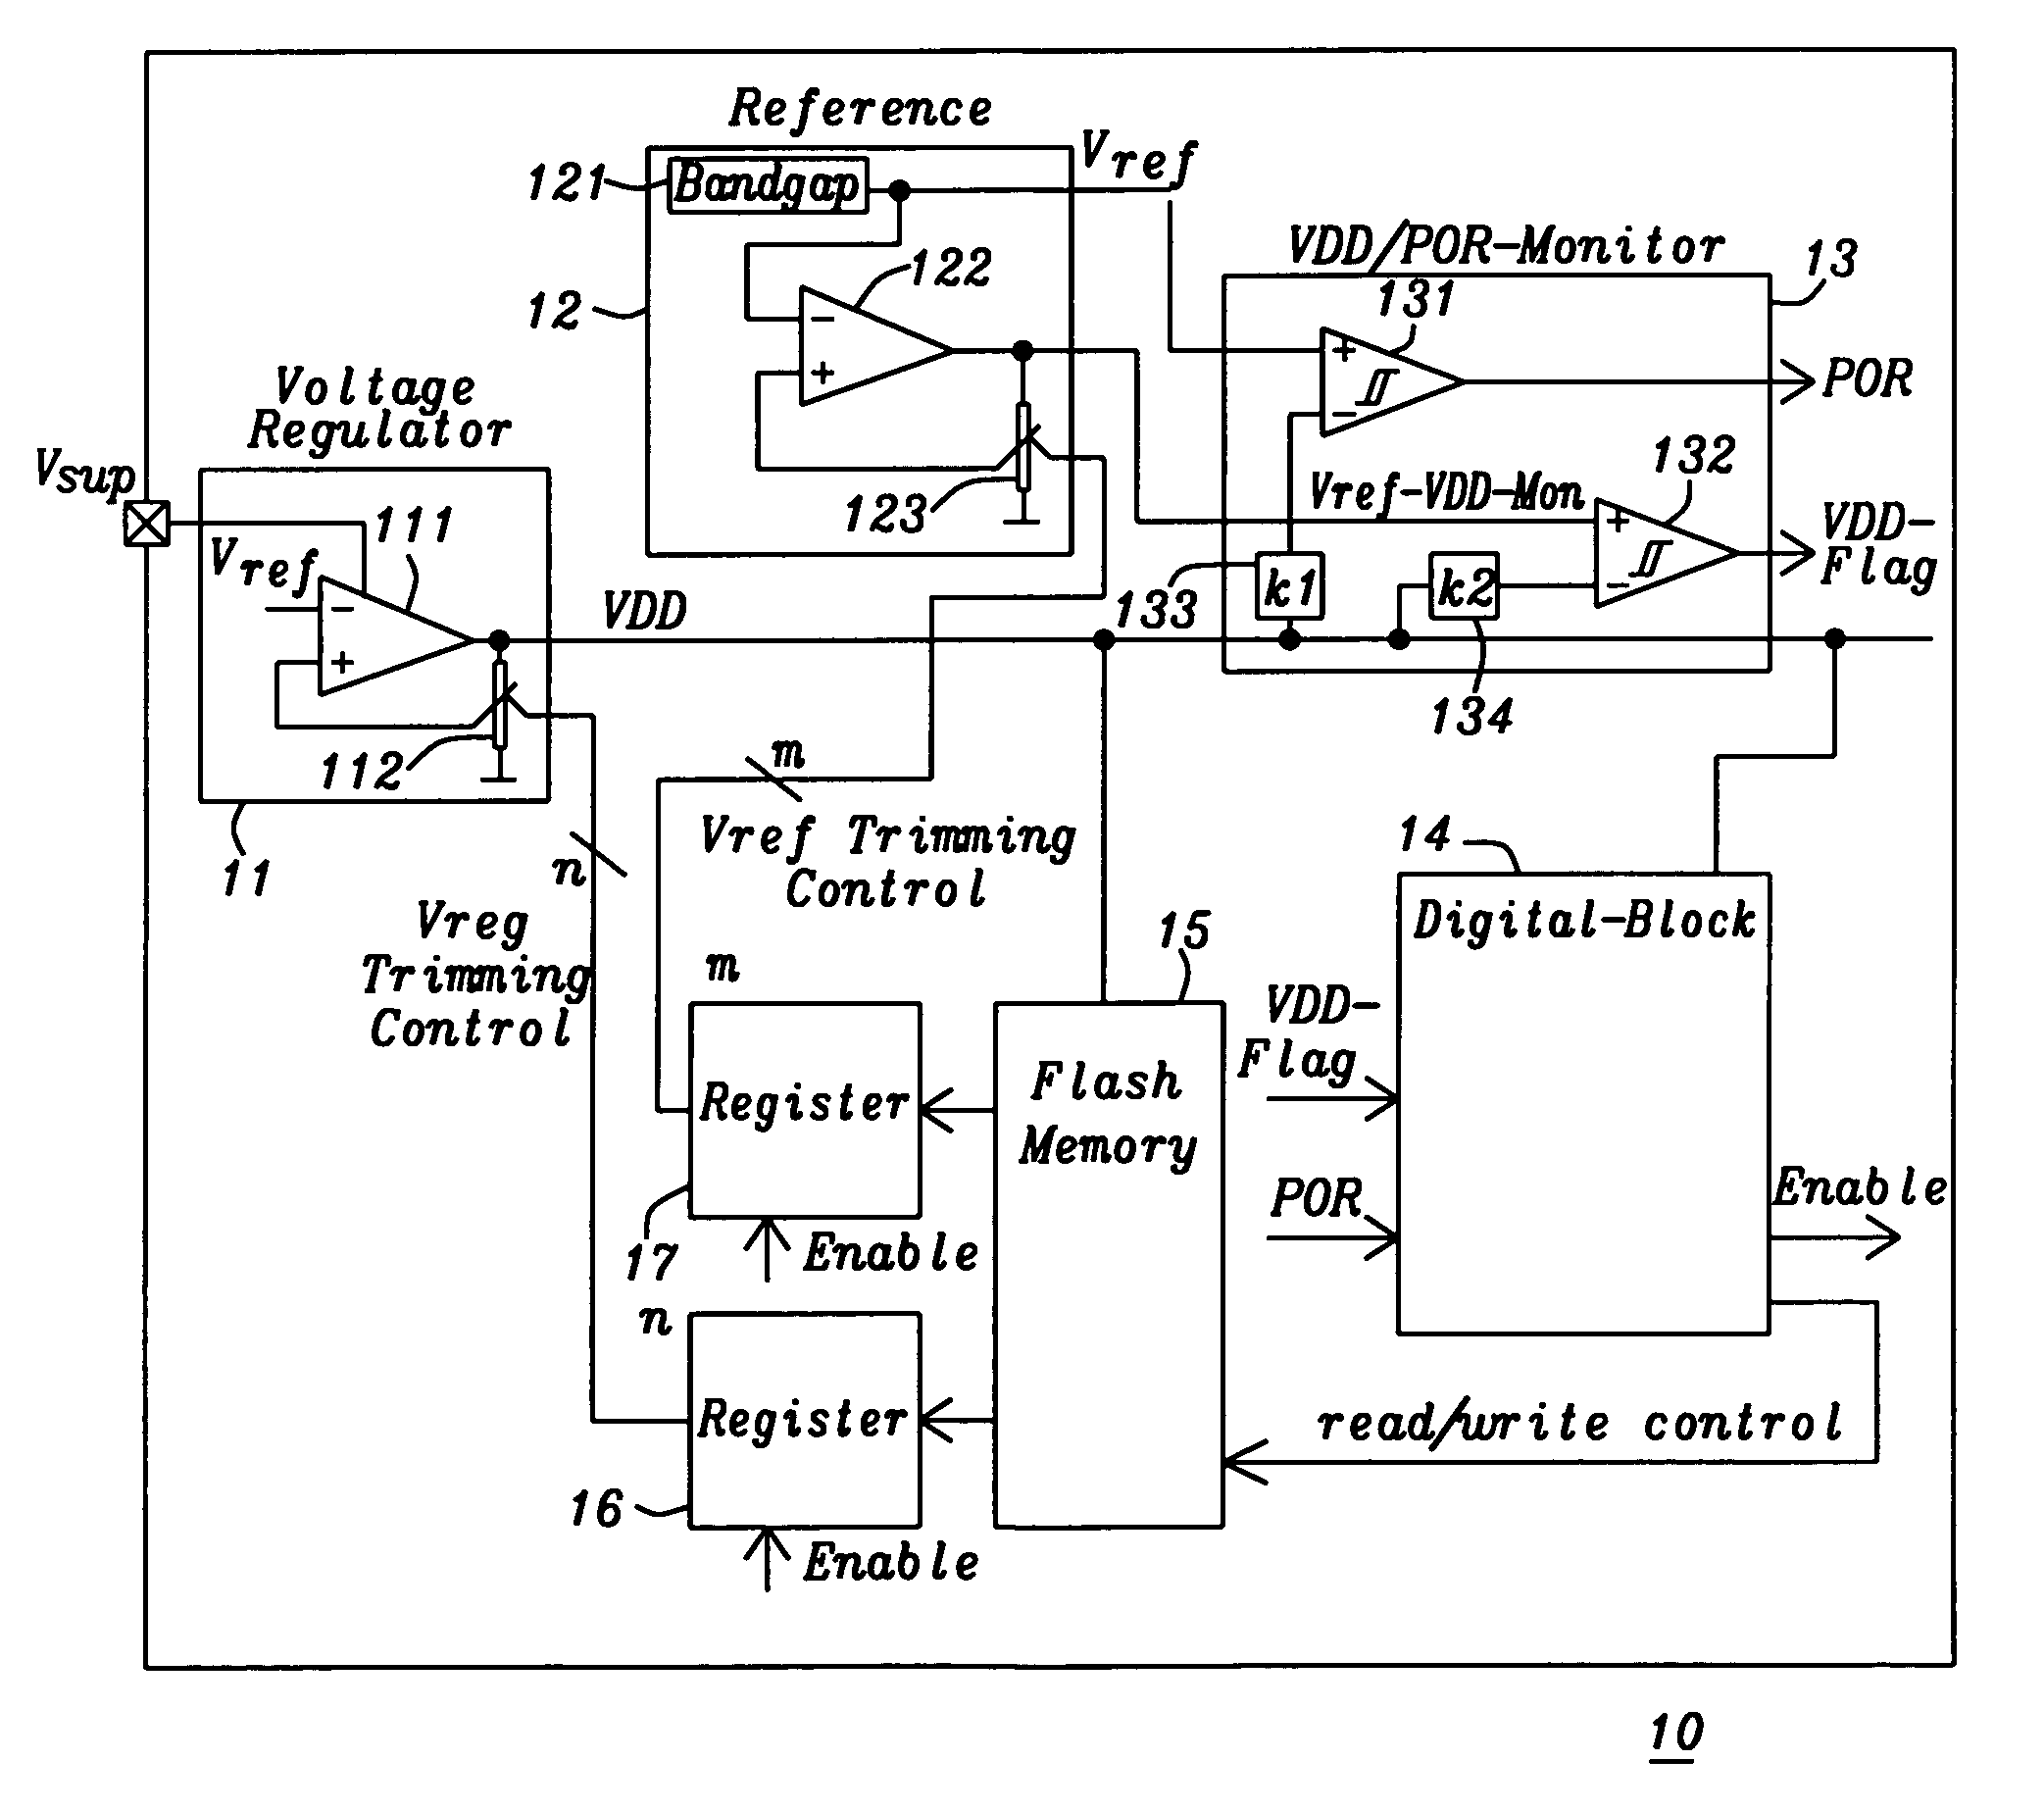 Accurate power supply system for flash-memory including on-chip supply voltage regulator, reference voltage generation, power-on reset, and supply voltage monitor